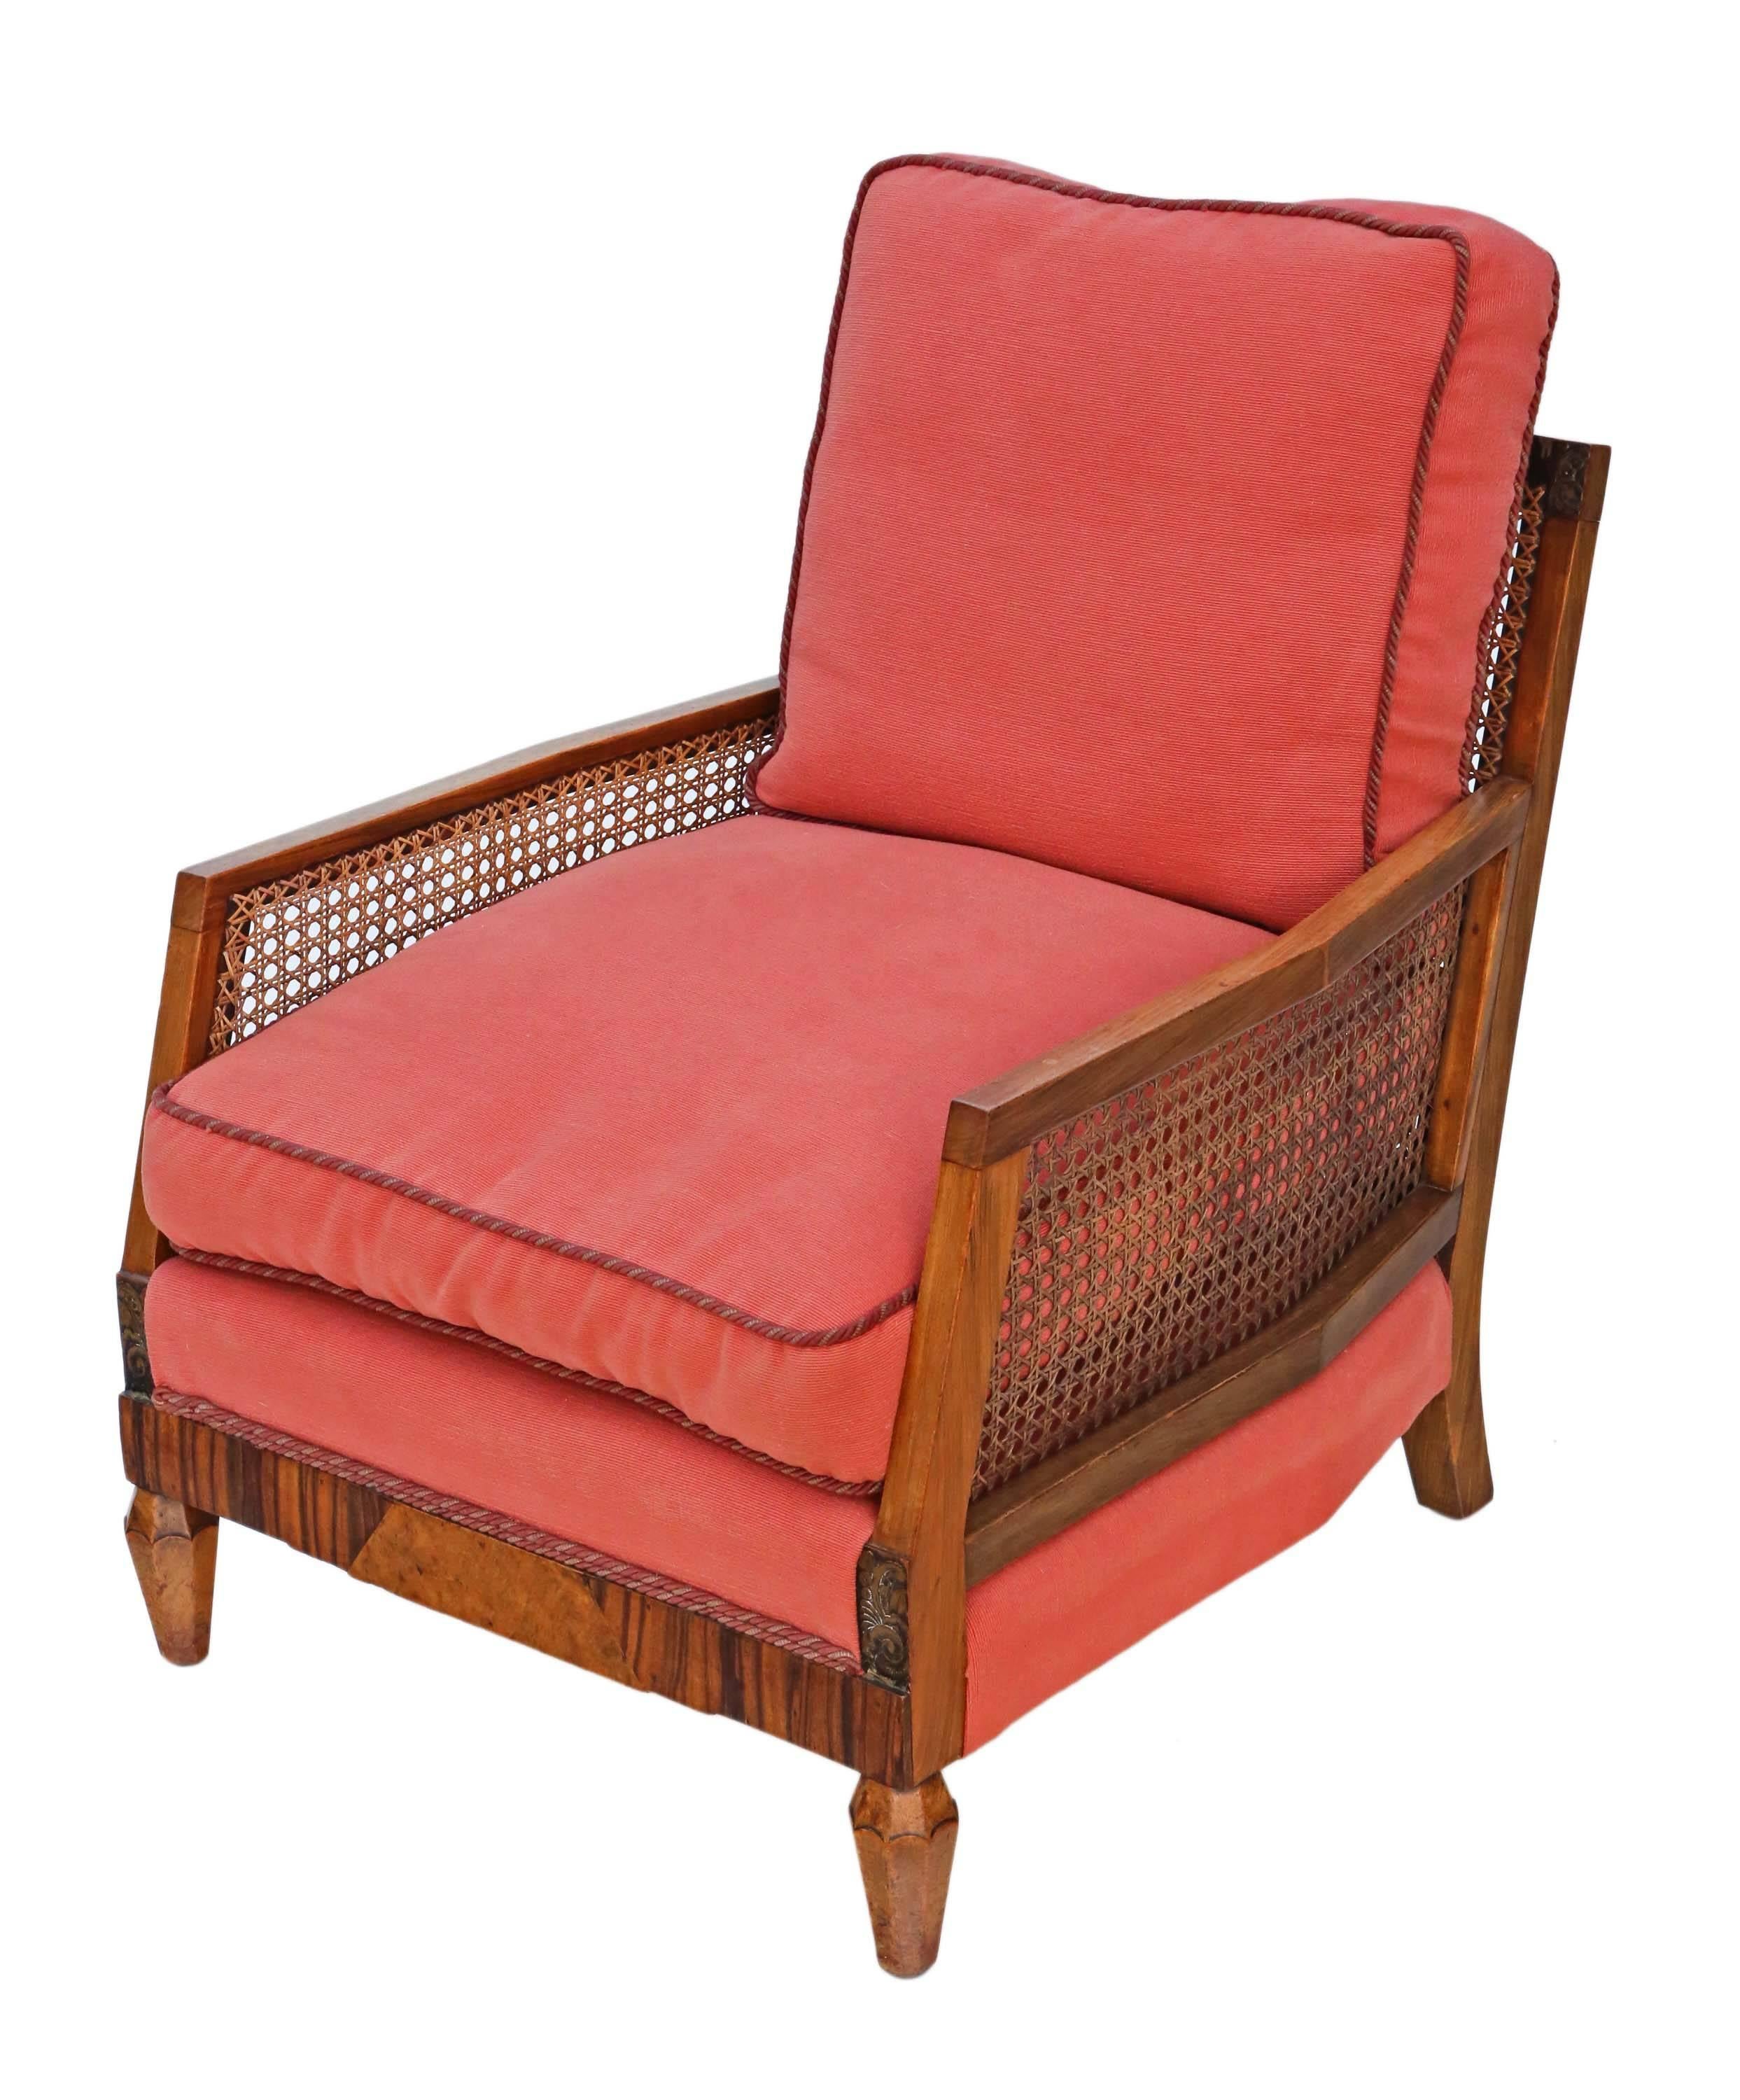 Early 20th Century Antique Quality Art Deco circa 1920-1930 Rosewood & Burr Walnut Bergere Armchair For Sale